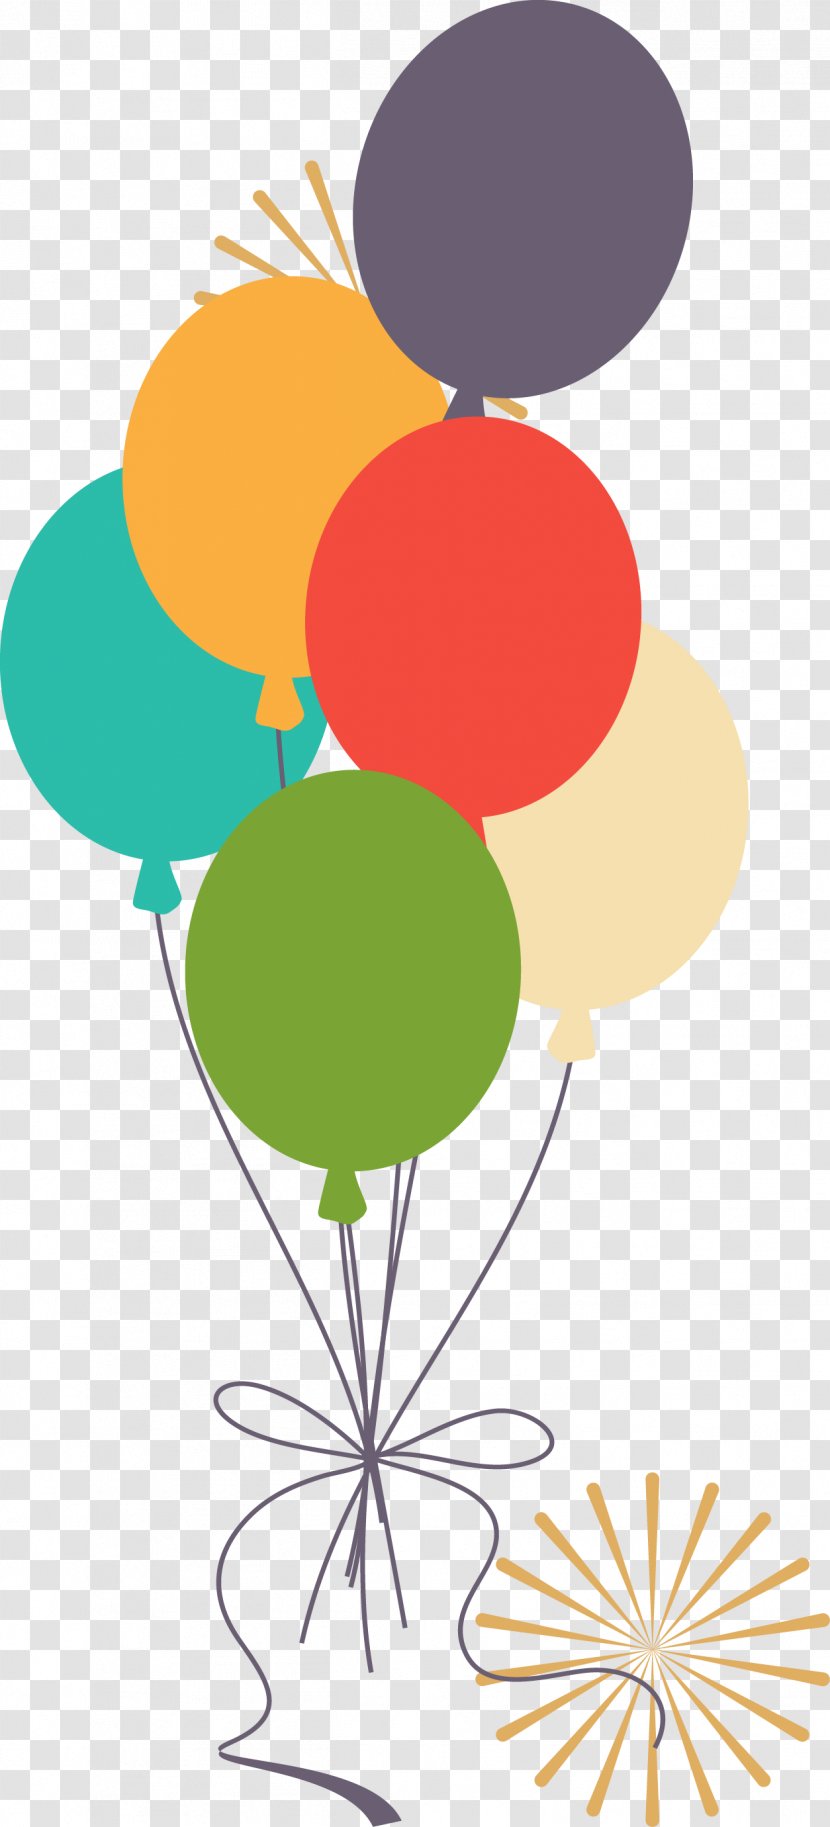 Balloon Illustration - Flower - Colored Balloons Vector Transparent PNG